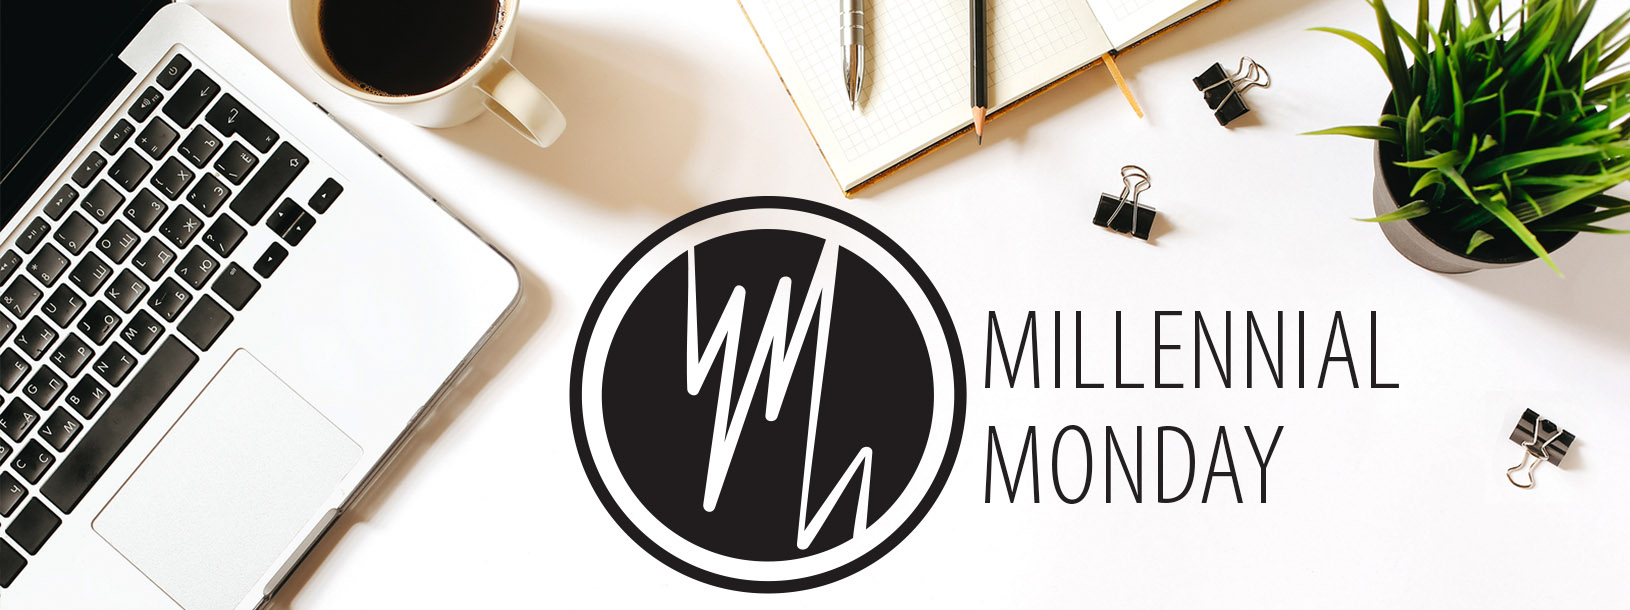 Millennial Monday: Offense is a choice… let’s not choose it!